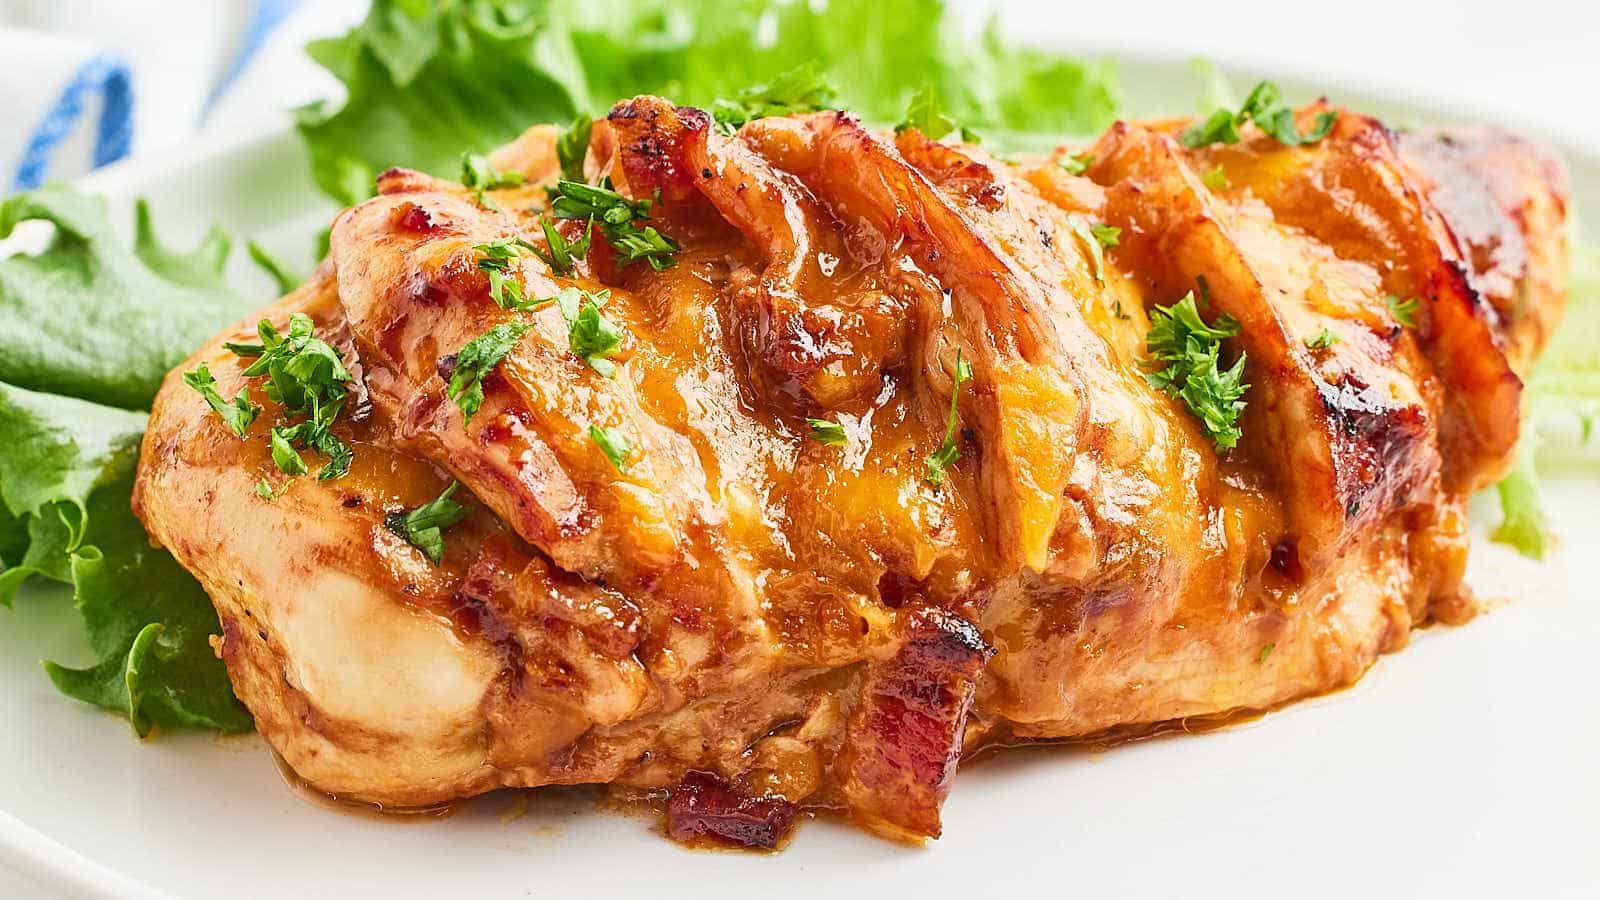 A chicken breast topped with bacon and lettuce on a white plate.